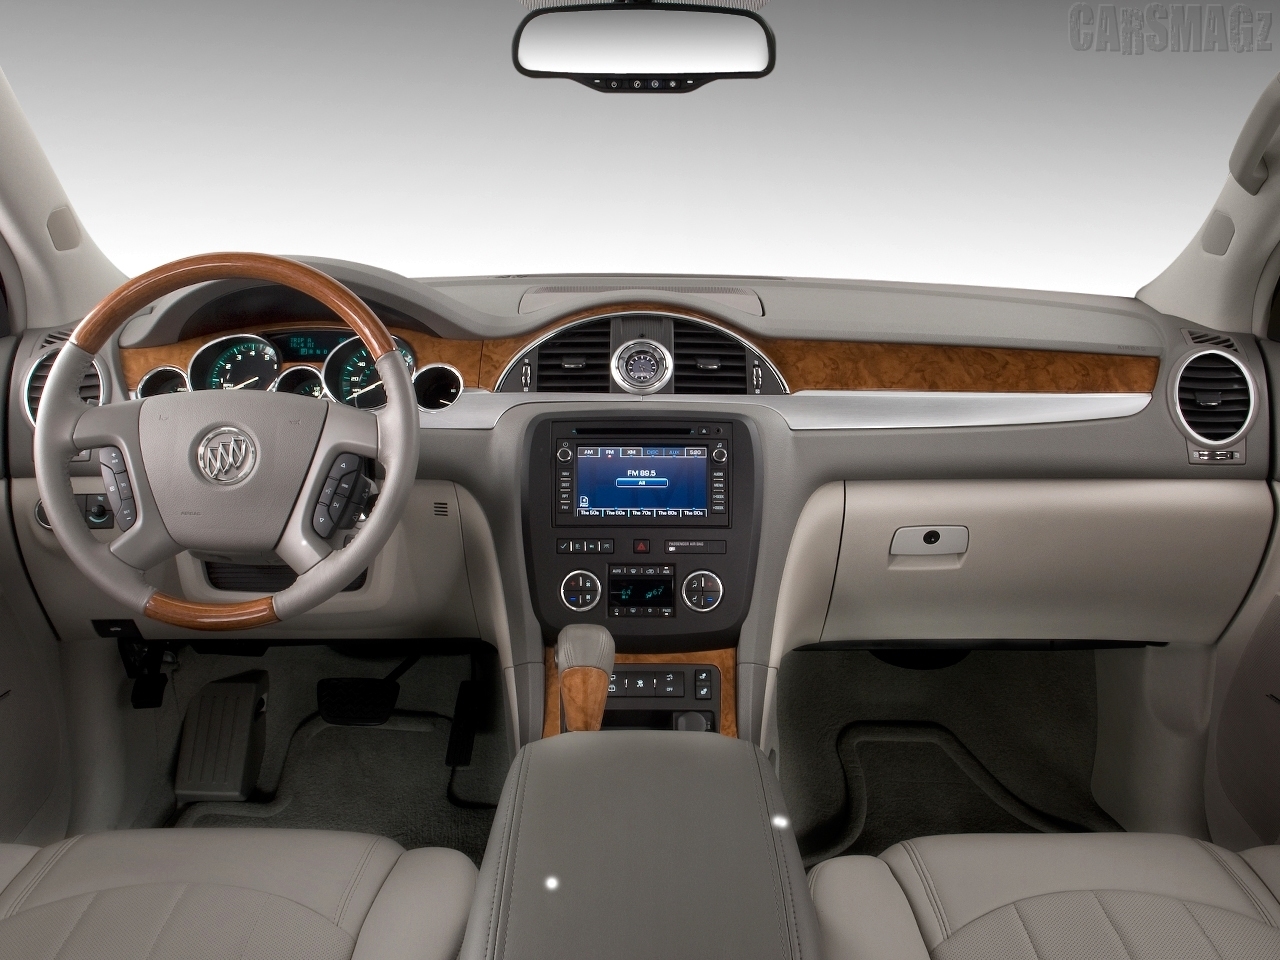 buick Enclave From Interior View Picture.